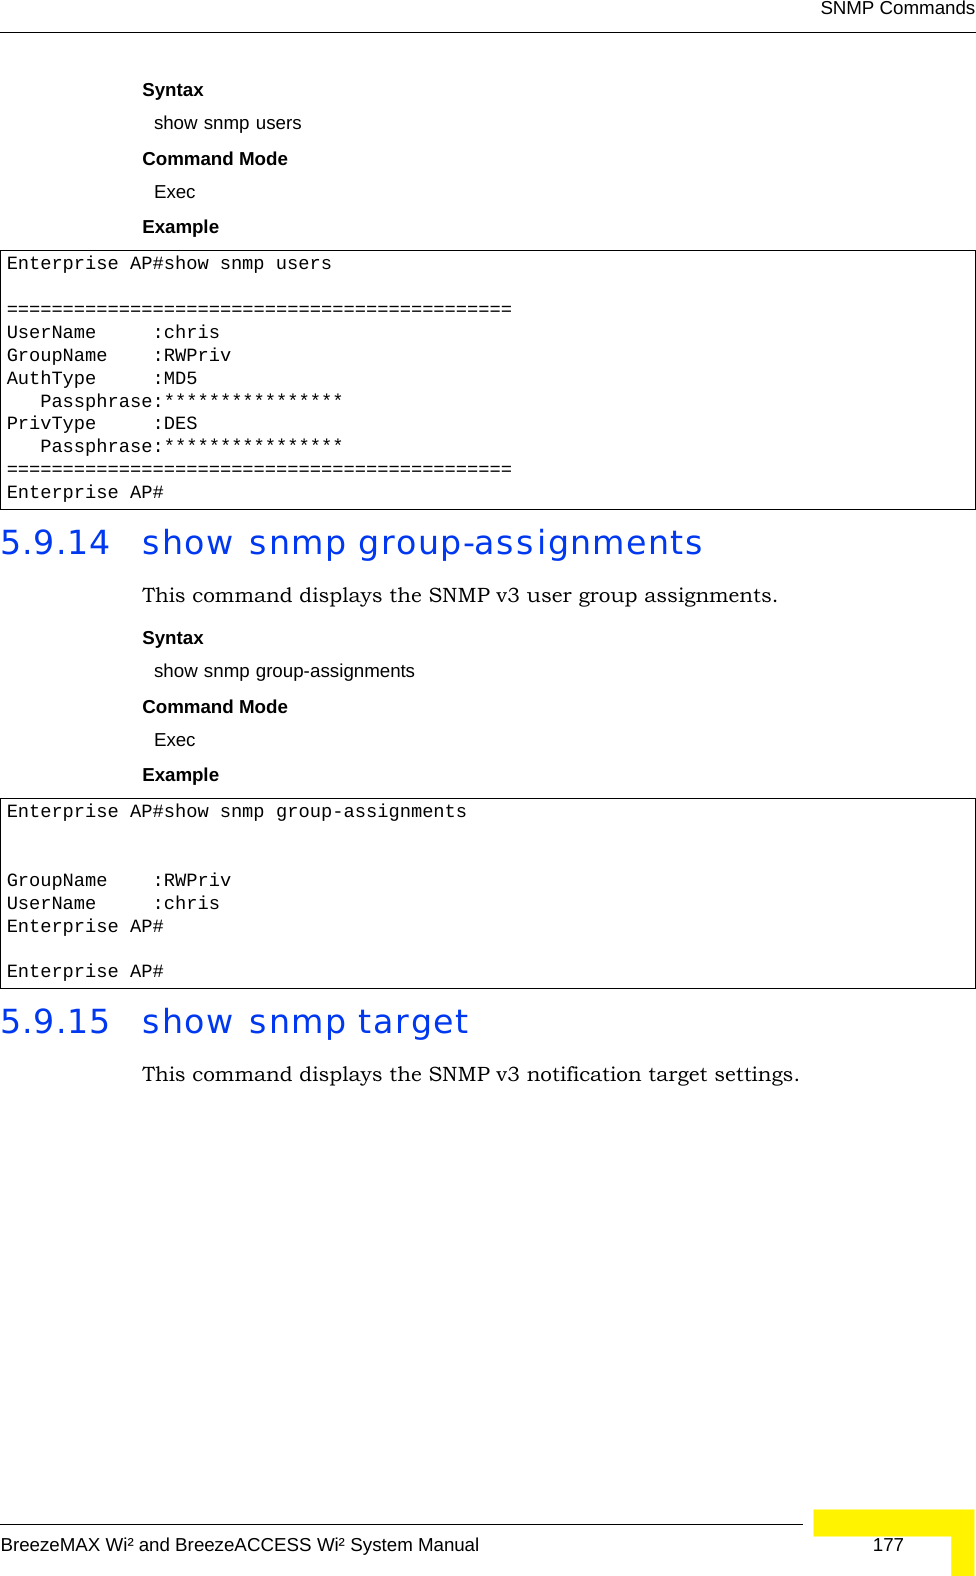 SNMP CommandsBreezeMAX Wi² and BreezeACCESS Wi² System Manual  177Syntax show snmp usersCommand ModeExecExample 5.9.14 show snmp group-assignmentsThis command displays the SNMP v3 user group assignments.Syntax show snmp group-assignmentsCommand ModeExecExample 5.9.15 show snmp targetThis command displays the SNMP v3 notification target settings.Enterprise AP#show snmp users=============================================UserName     :chrisGroupName    :RWPrivAuthType     :MD5   Passphrase:****************PrivType     :DES   Passphrase:****************=============================================Enterprise AP#Enterprise AP#show snmp group-assignmentsGroupName    :RWPrivUserName     :chrisEnterprise AP#Enterprise AP#